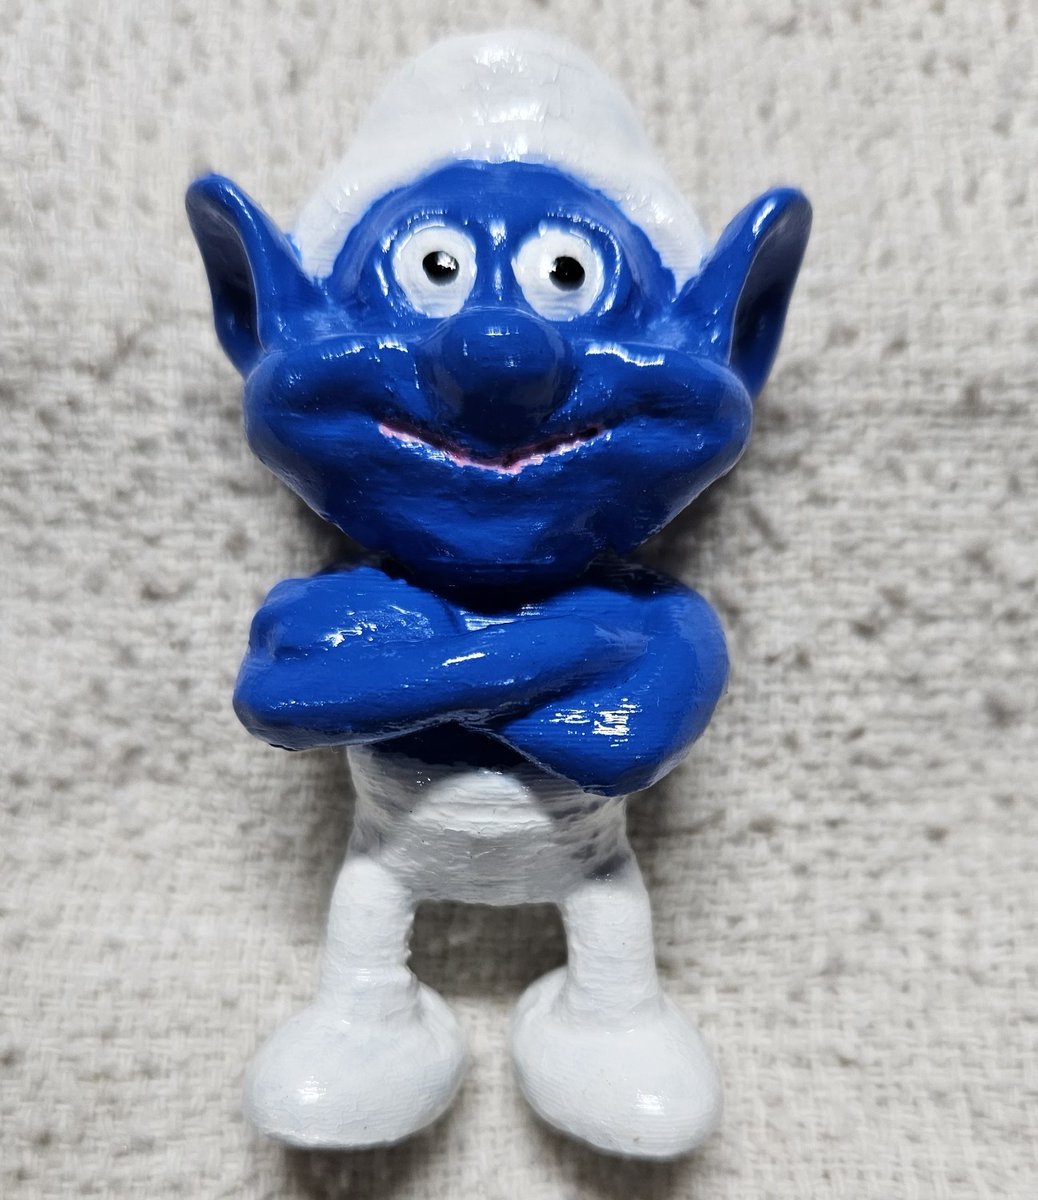 3D printed and painted Hefty Smurf . . . . #smurf #smurfs #3d #3dprint #3dprinting #3dprinted #3dprinter #heftysmurf